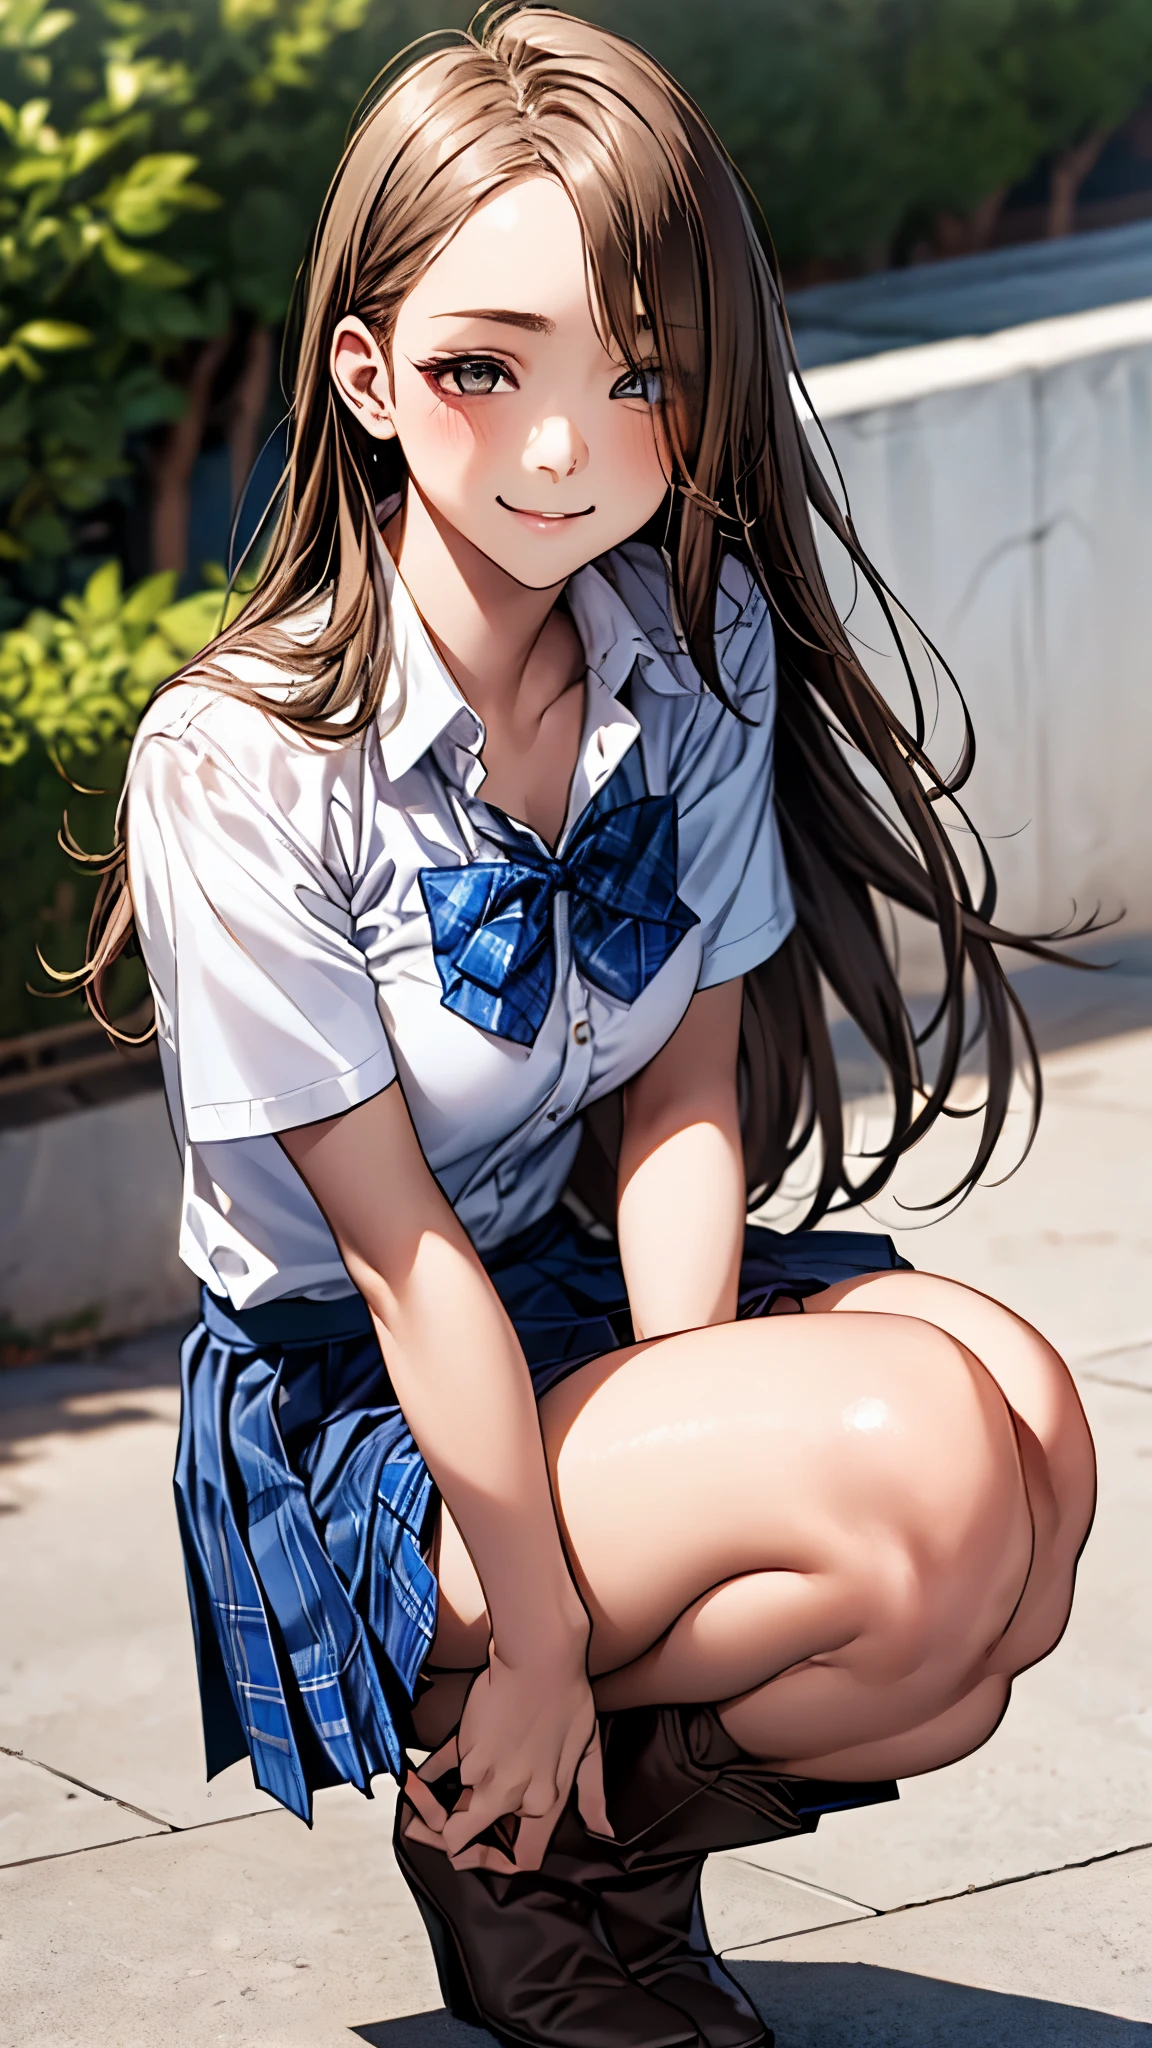 (masterpiece:1.2, top-quality), (realistic, photorealistic:1.4), beautiful illustration, (natural side lighting, movie lighting), 
looking at viewer, 1 girl, japanese, high school girl, perfect face, cute and symmetrical face, shiny skin, slender,
(middle hair:1.5, straight hair, light brown), parted bangs, long eye lasher, large breasts:0.8, 
beautiful hair, beautiful face, beautiful detailed eyes, beautiful clavicle, beautiful body, beautiful chest, beautiful thigh, beautiful legs, beautiful fingers, 
((short sleeve collared white shirt, , blue checked pleated skirt, blue plaid bow tie), white boots), pink panties, 
(beautiful scenery), morning, (down town), squatting, (cute, lovely smile, upper eyes), 